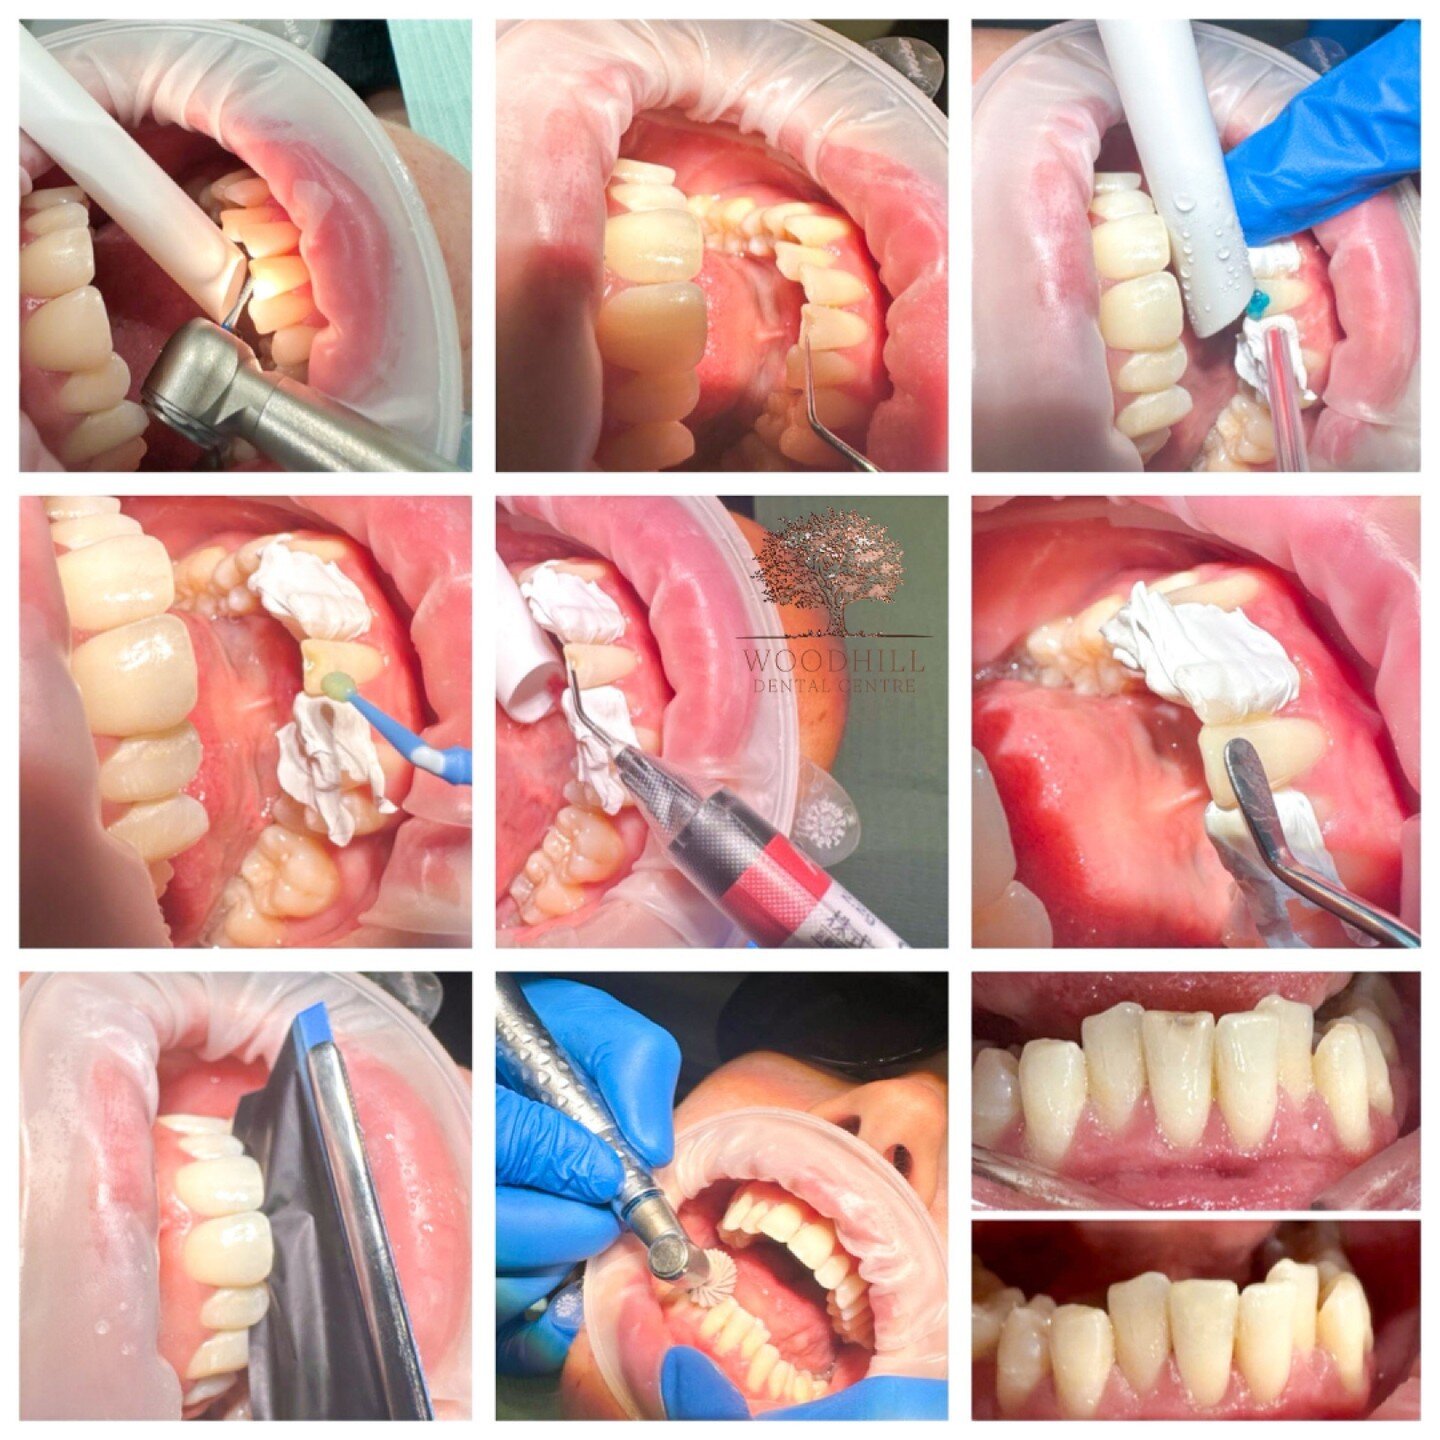 Transforming the appearance of a patient's smile can have a significant impact on their self-confidence. In the case of a cracked front tooth that had started to decay a simple composite filling was the chosen treatment option. Here are the general s